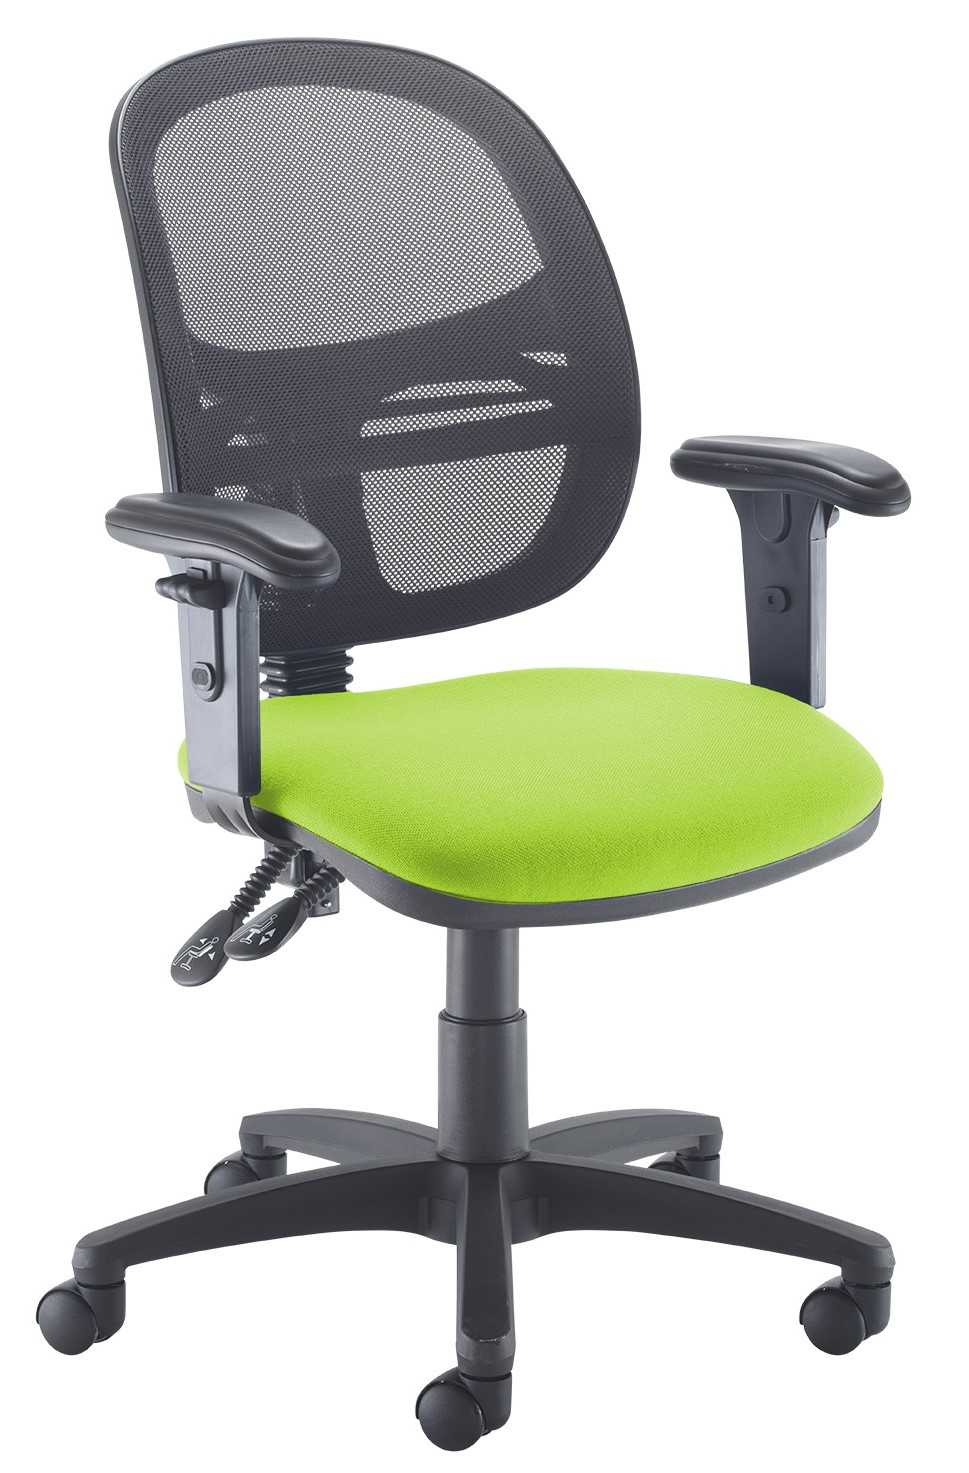 Vantage Mesh Back Chair Modern Office Chairs With A Budget Price Tag